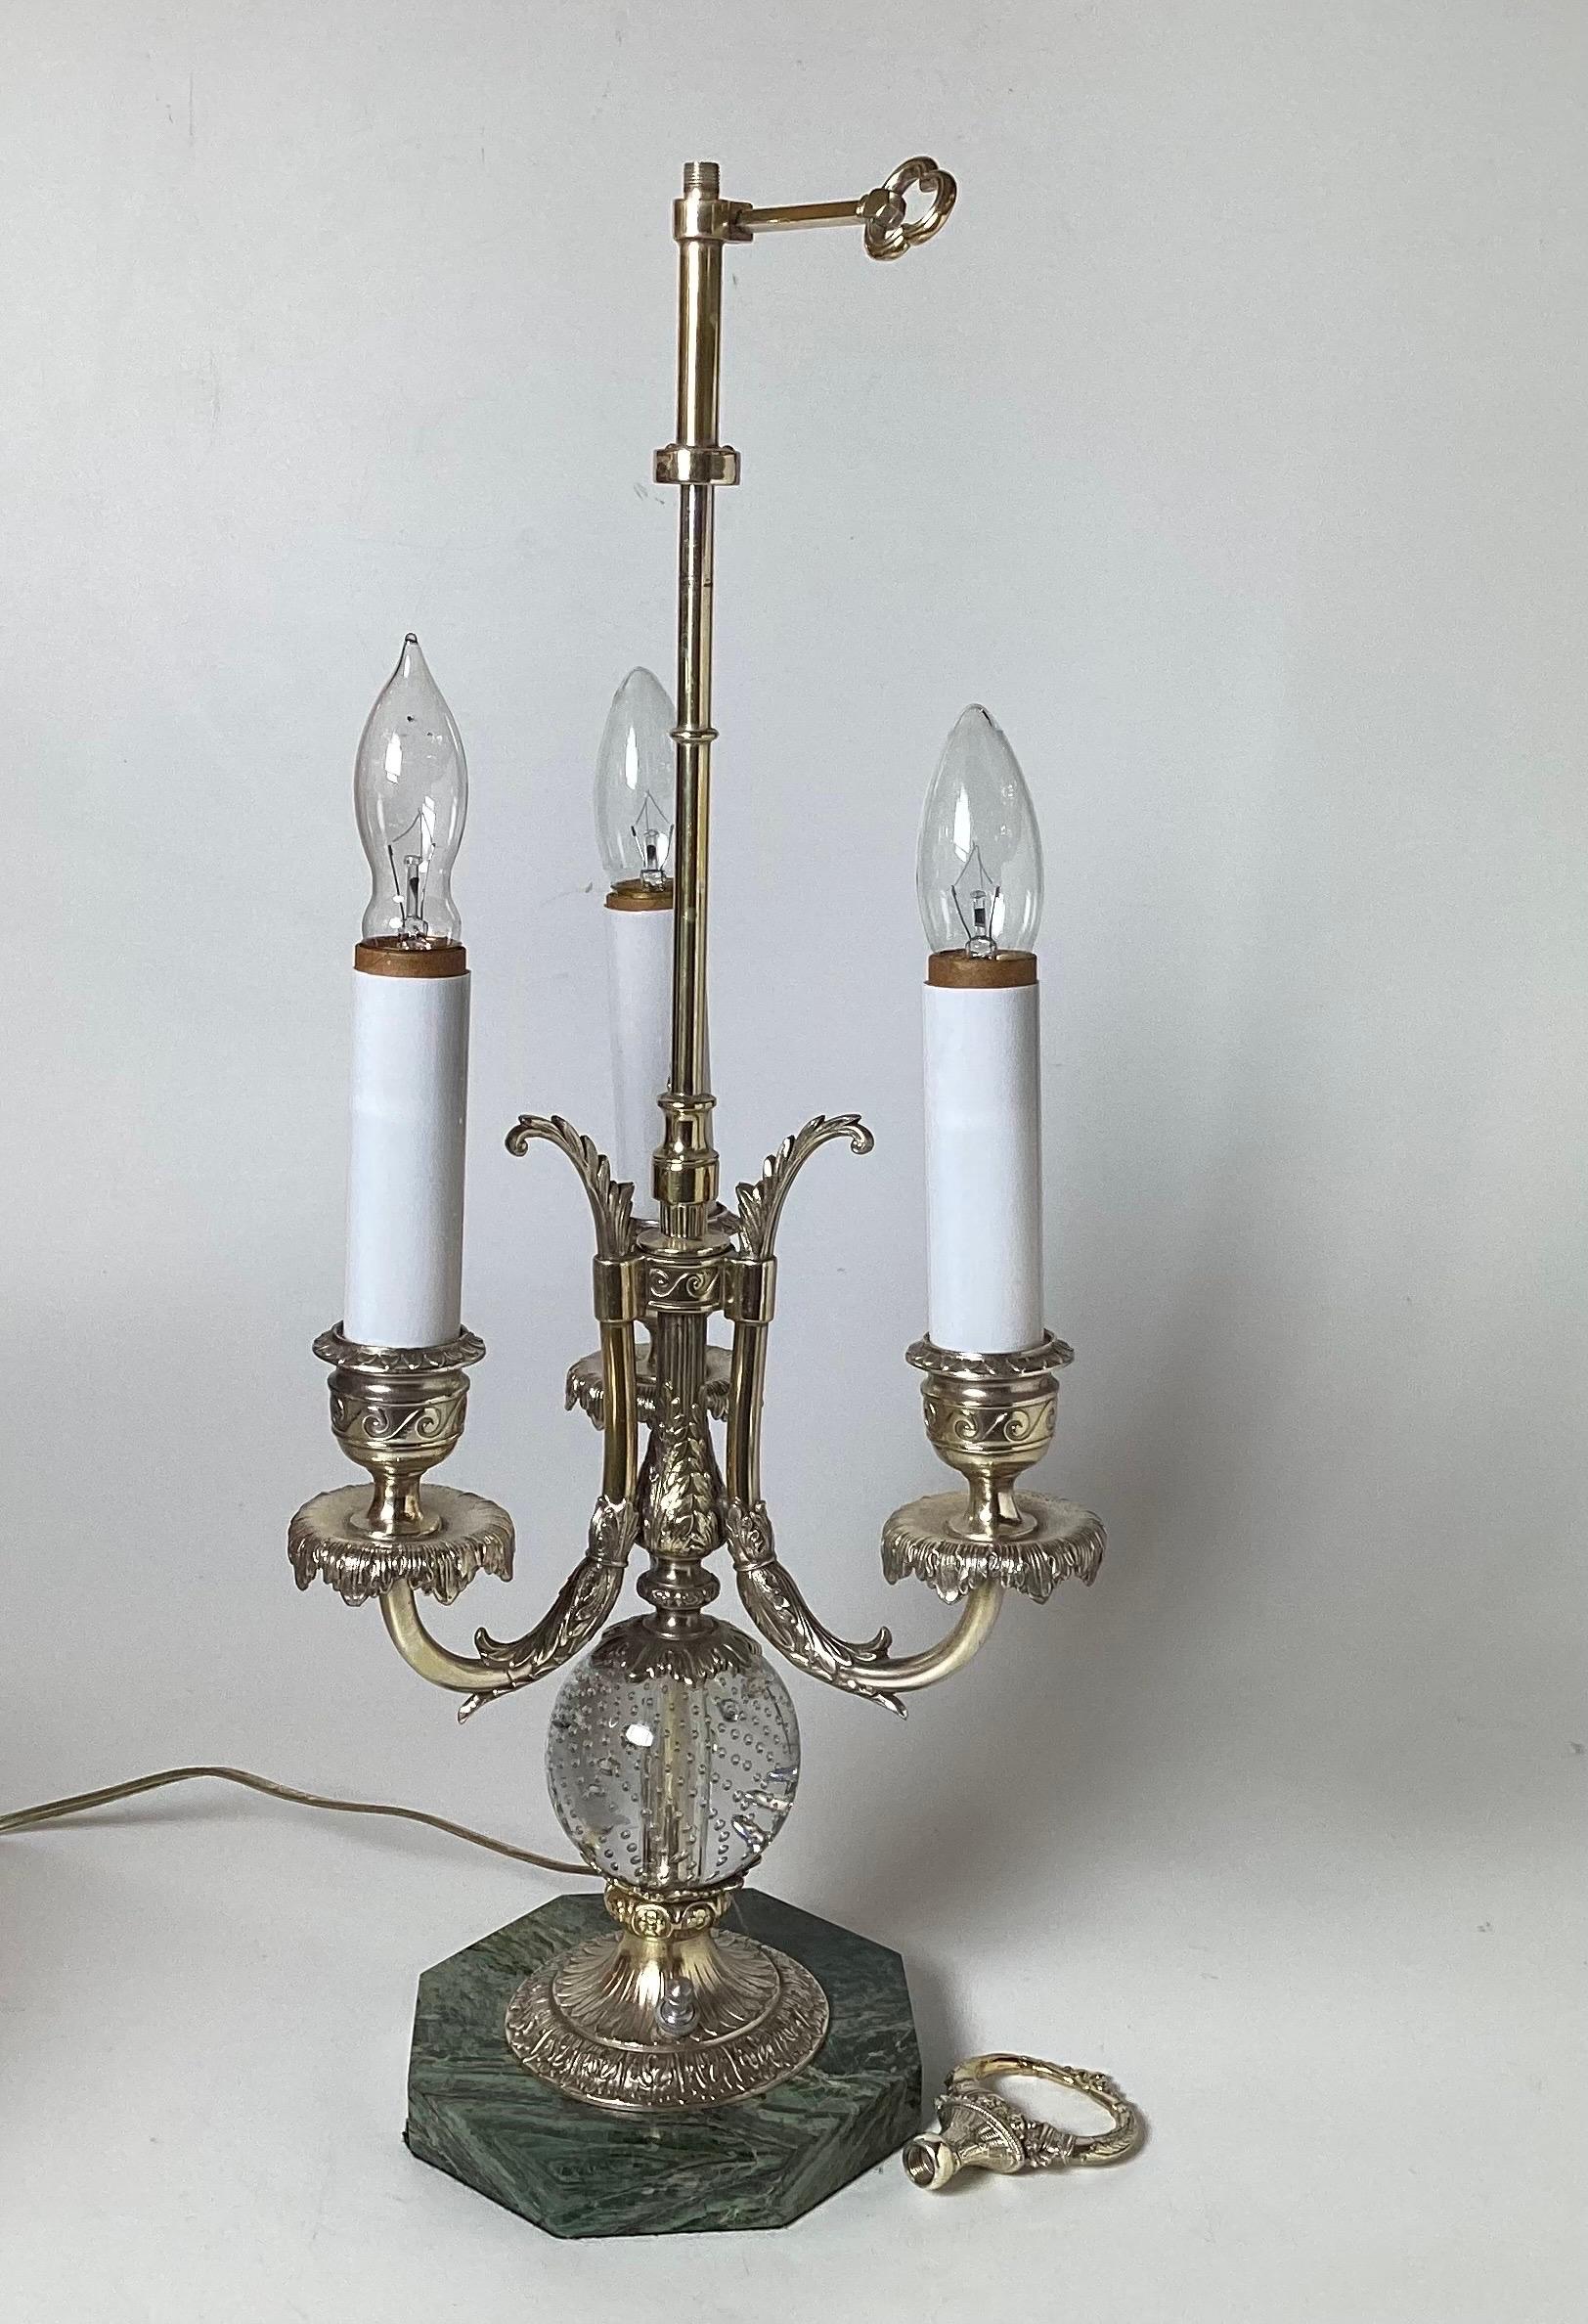 Mid 20th century Pairpoint Silvered Bronze Three Armed table lamp with marble base. Great basket of fruit finial. Very good original condition .